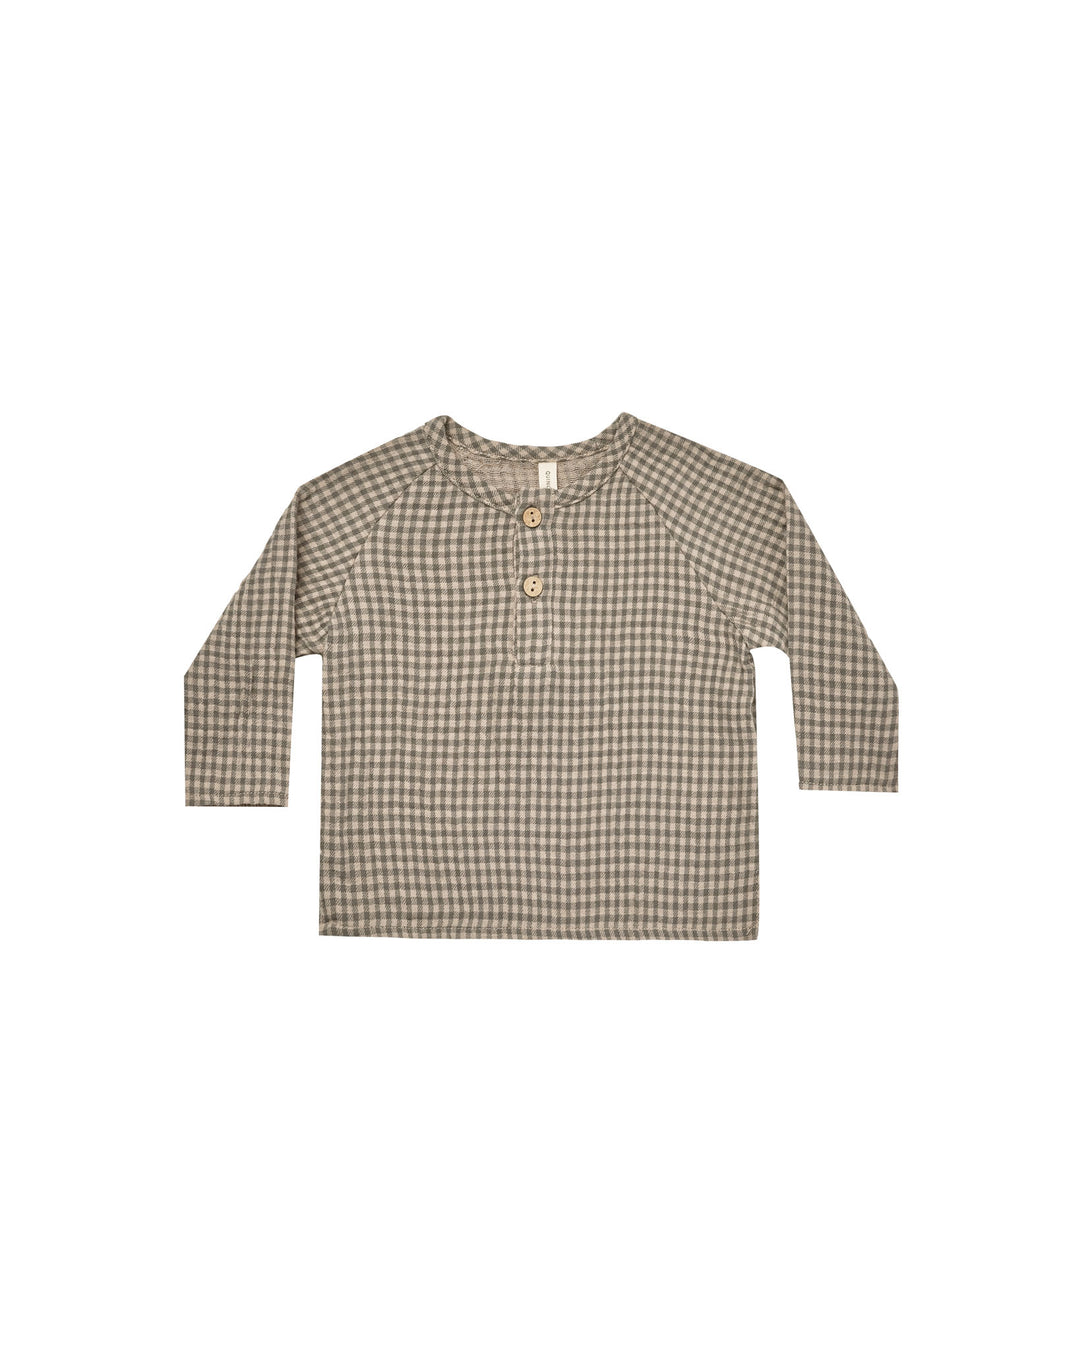 Zion Shirt, Forest Micro Plaid